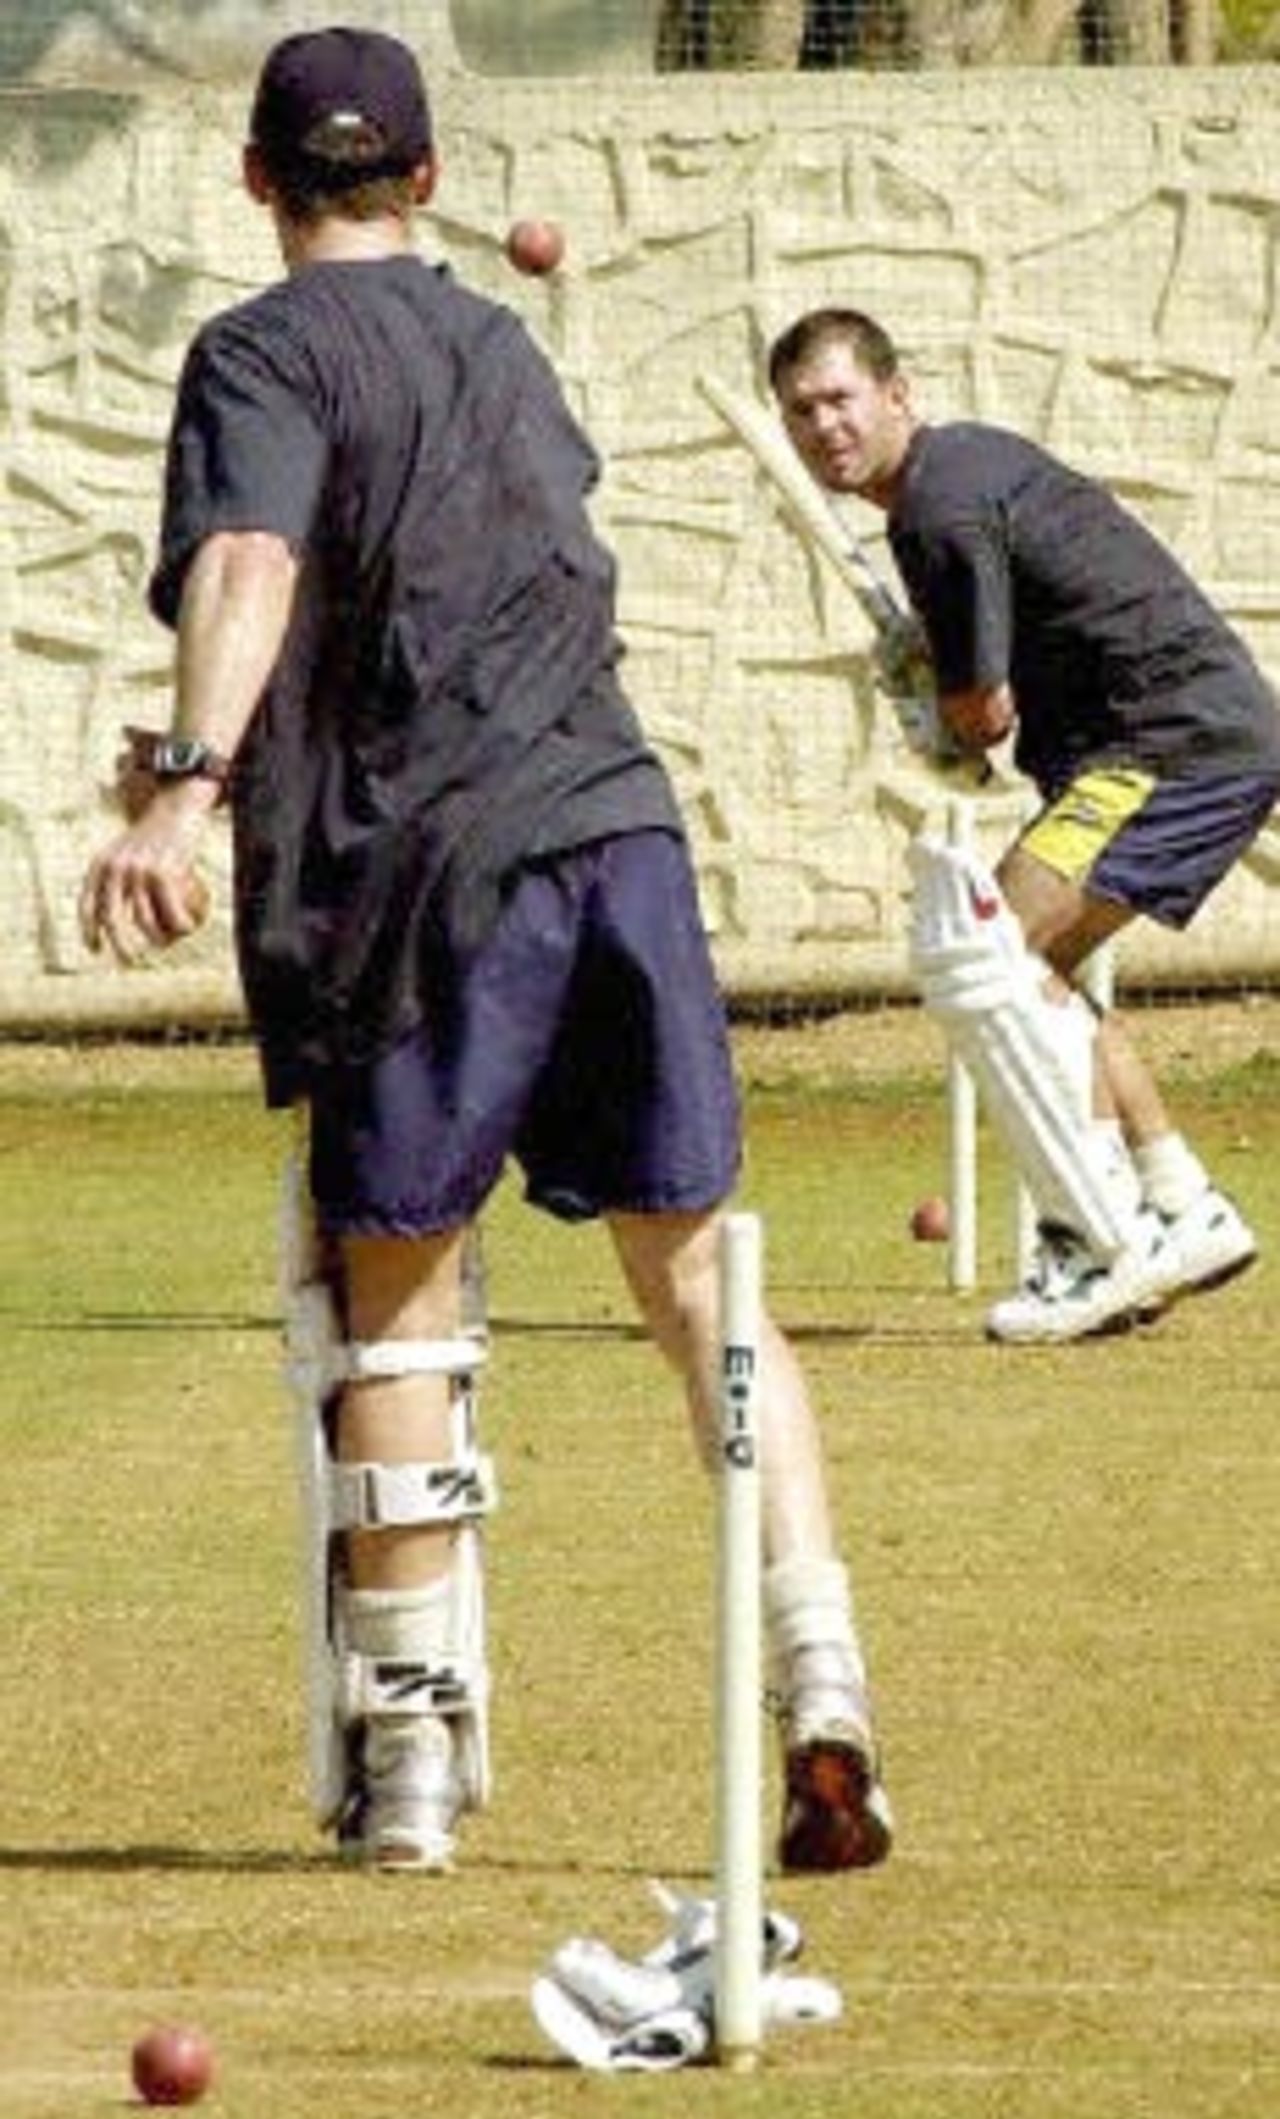 Australian batsman Ricky Ponting readies to strike the ball sent down by Damien Martyn at the first net session of the Australian Cricket team 15 February 2001 at the MIG stadium in Bombay.The Australian cricket team will be playing three test matches and five one-day internationals during their India tour.